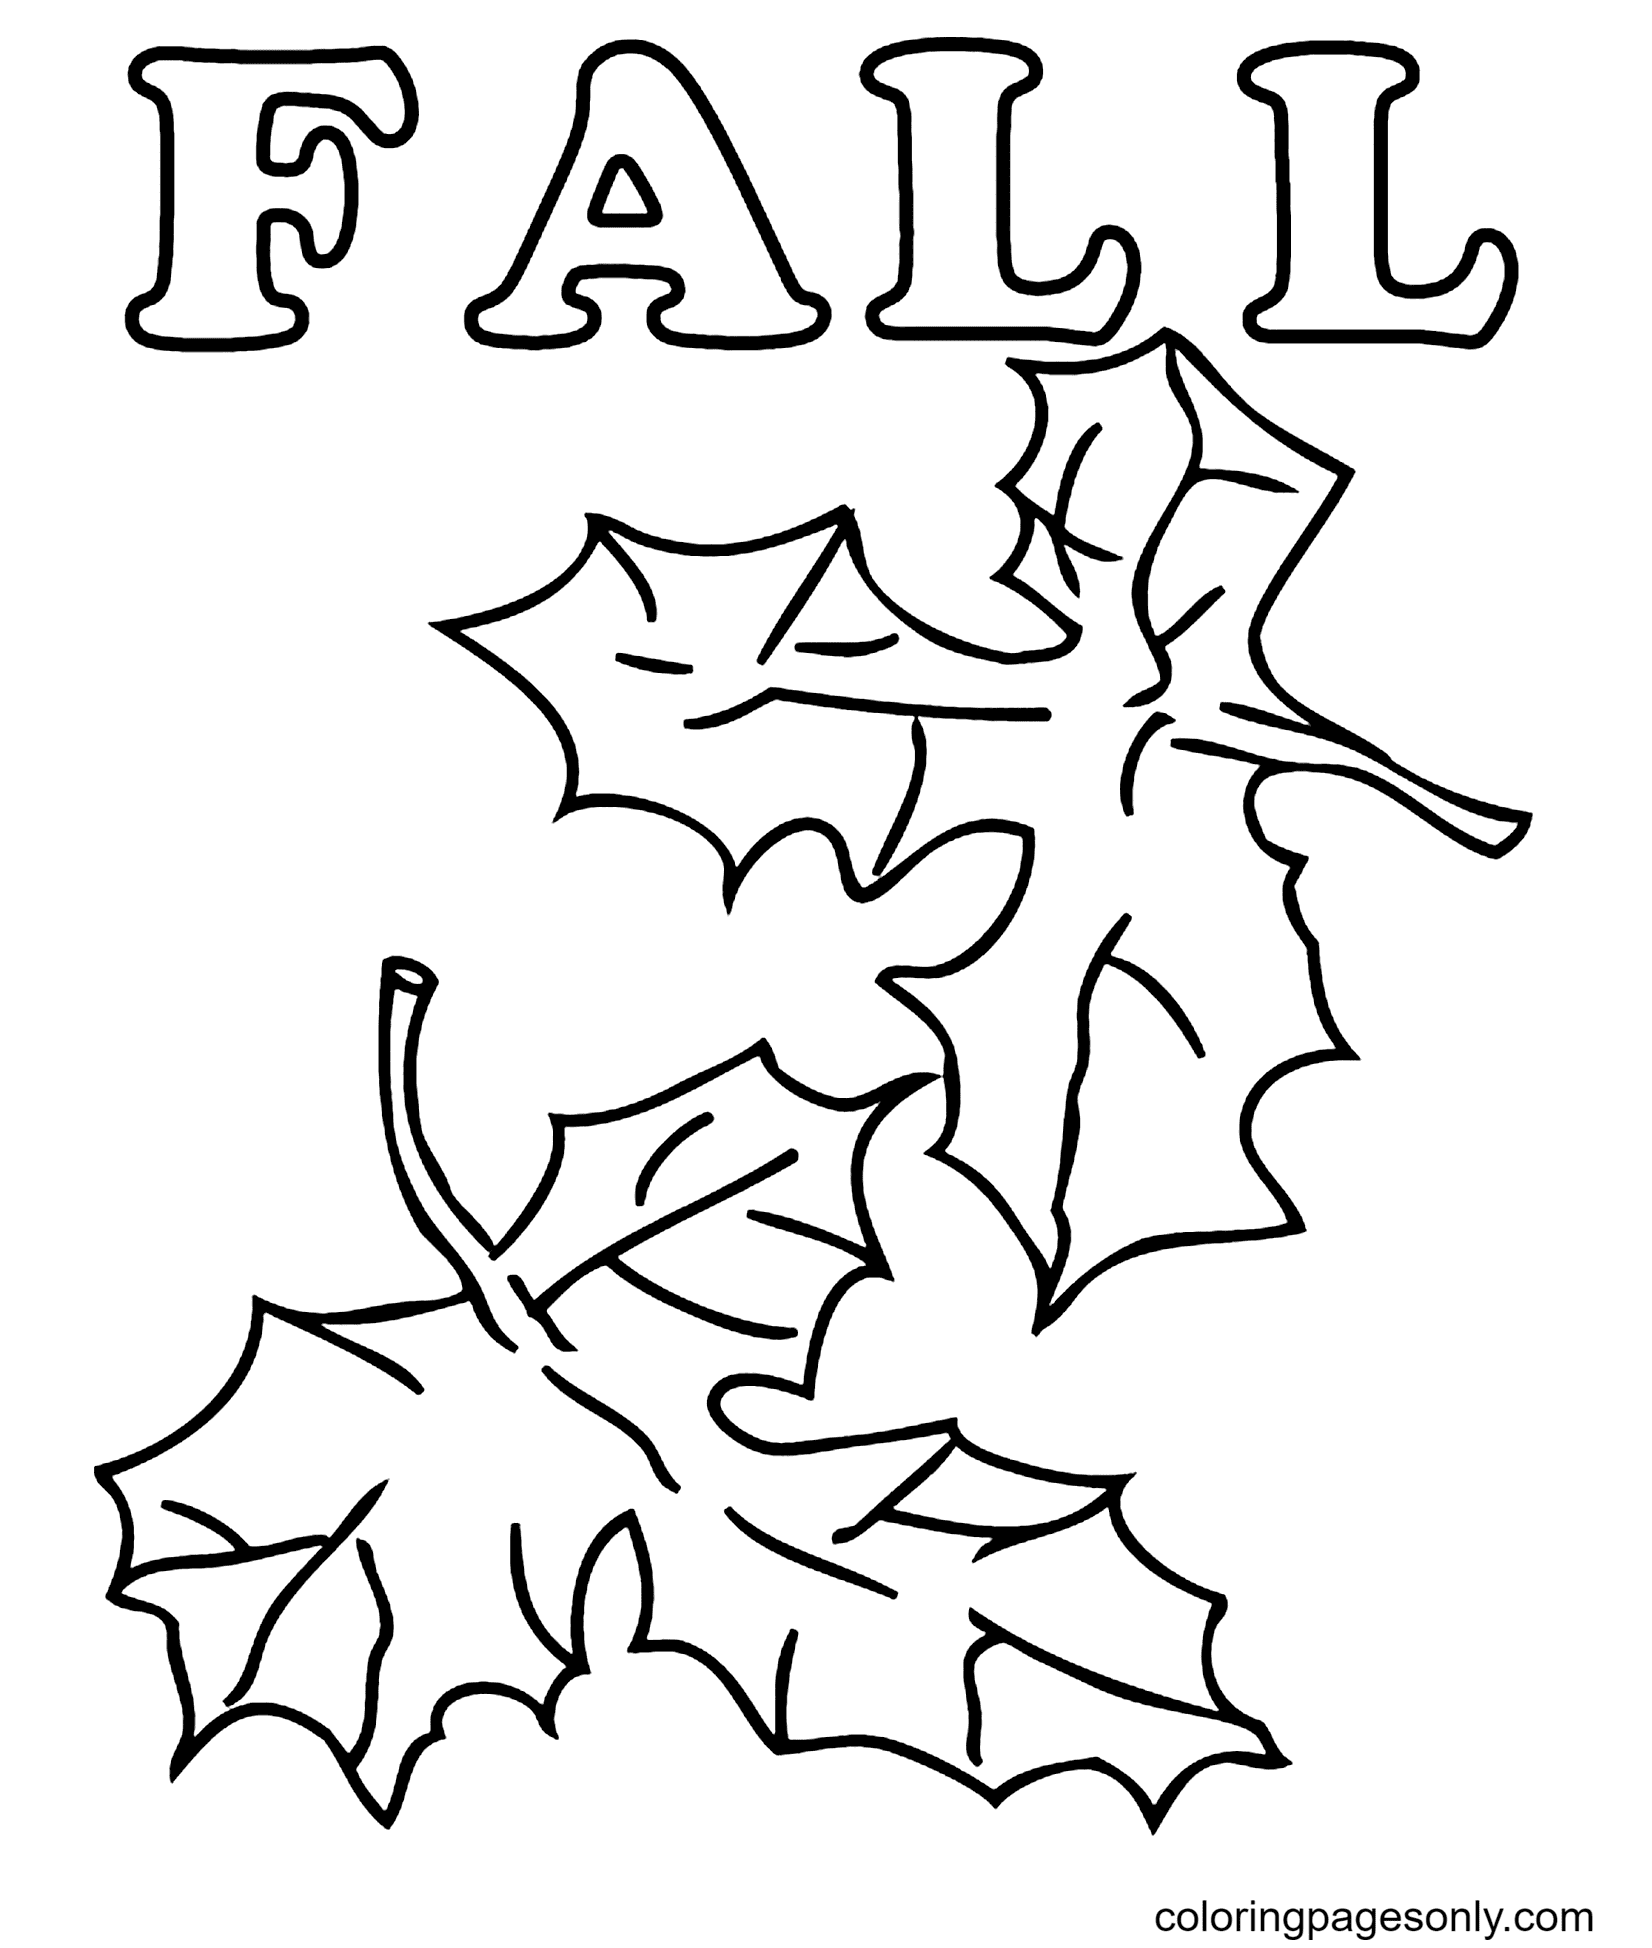 fall-leaves-free-printable-coloring-pages-autumn-leaves-coloring